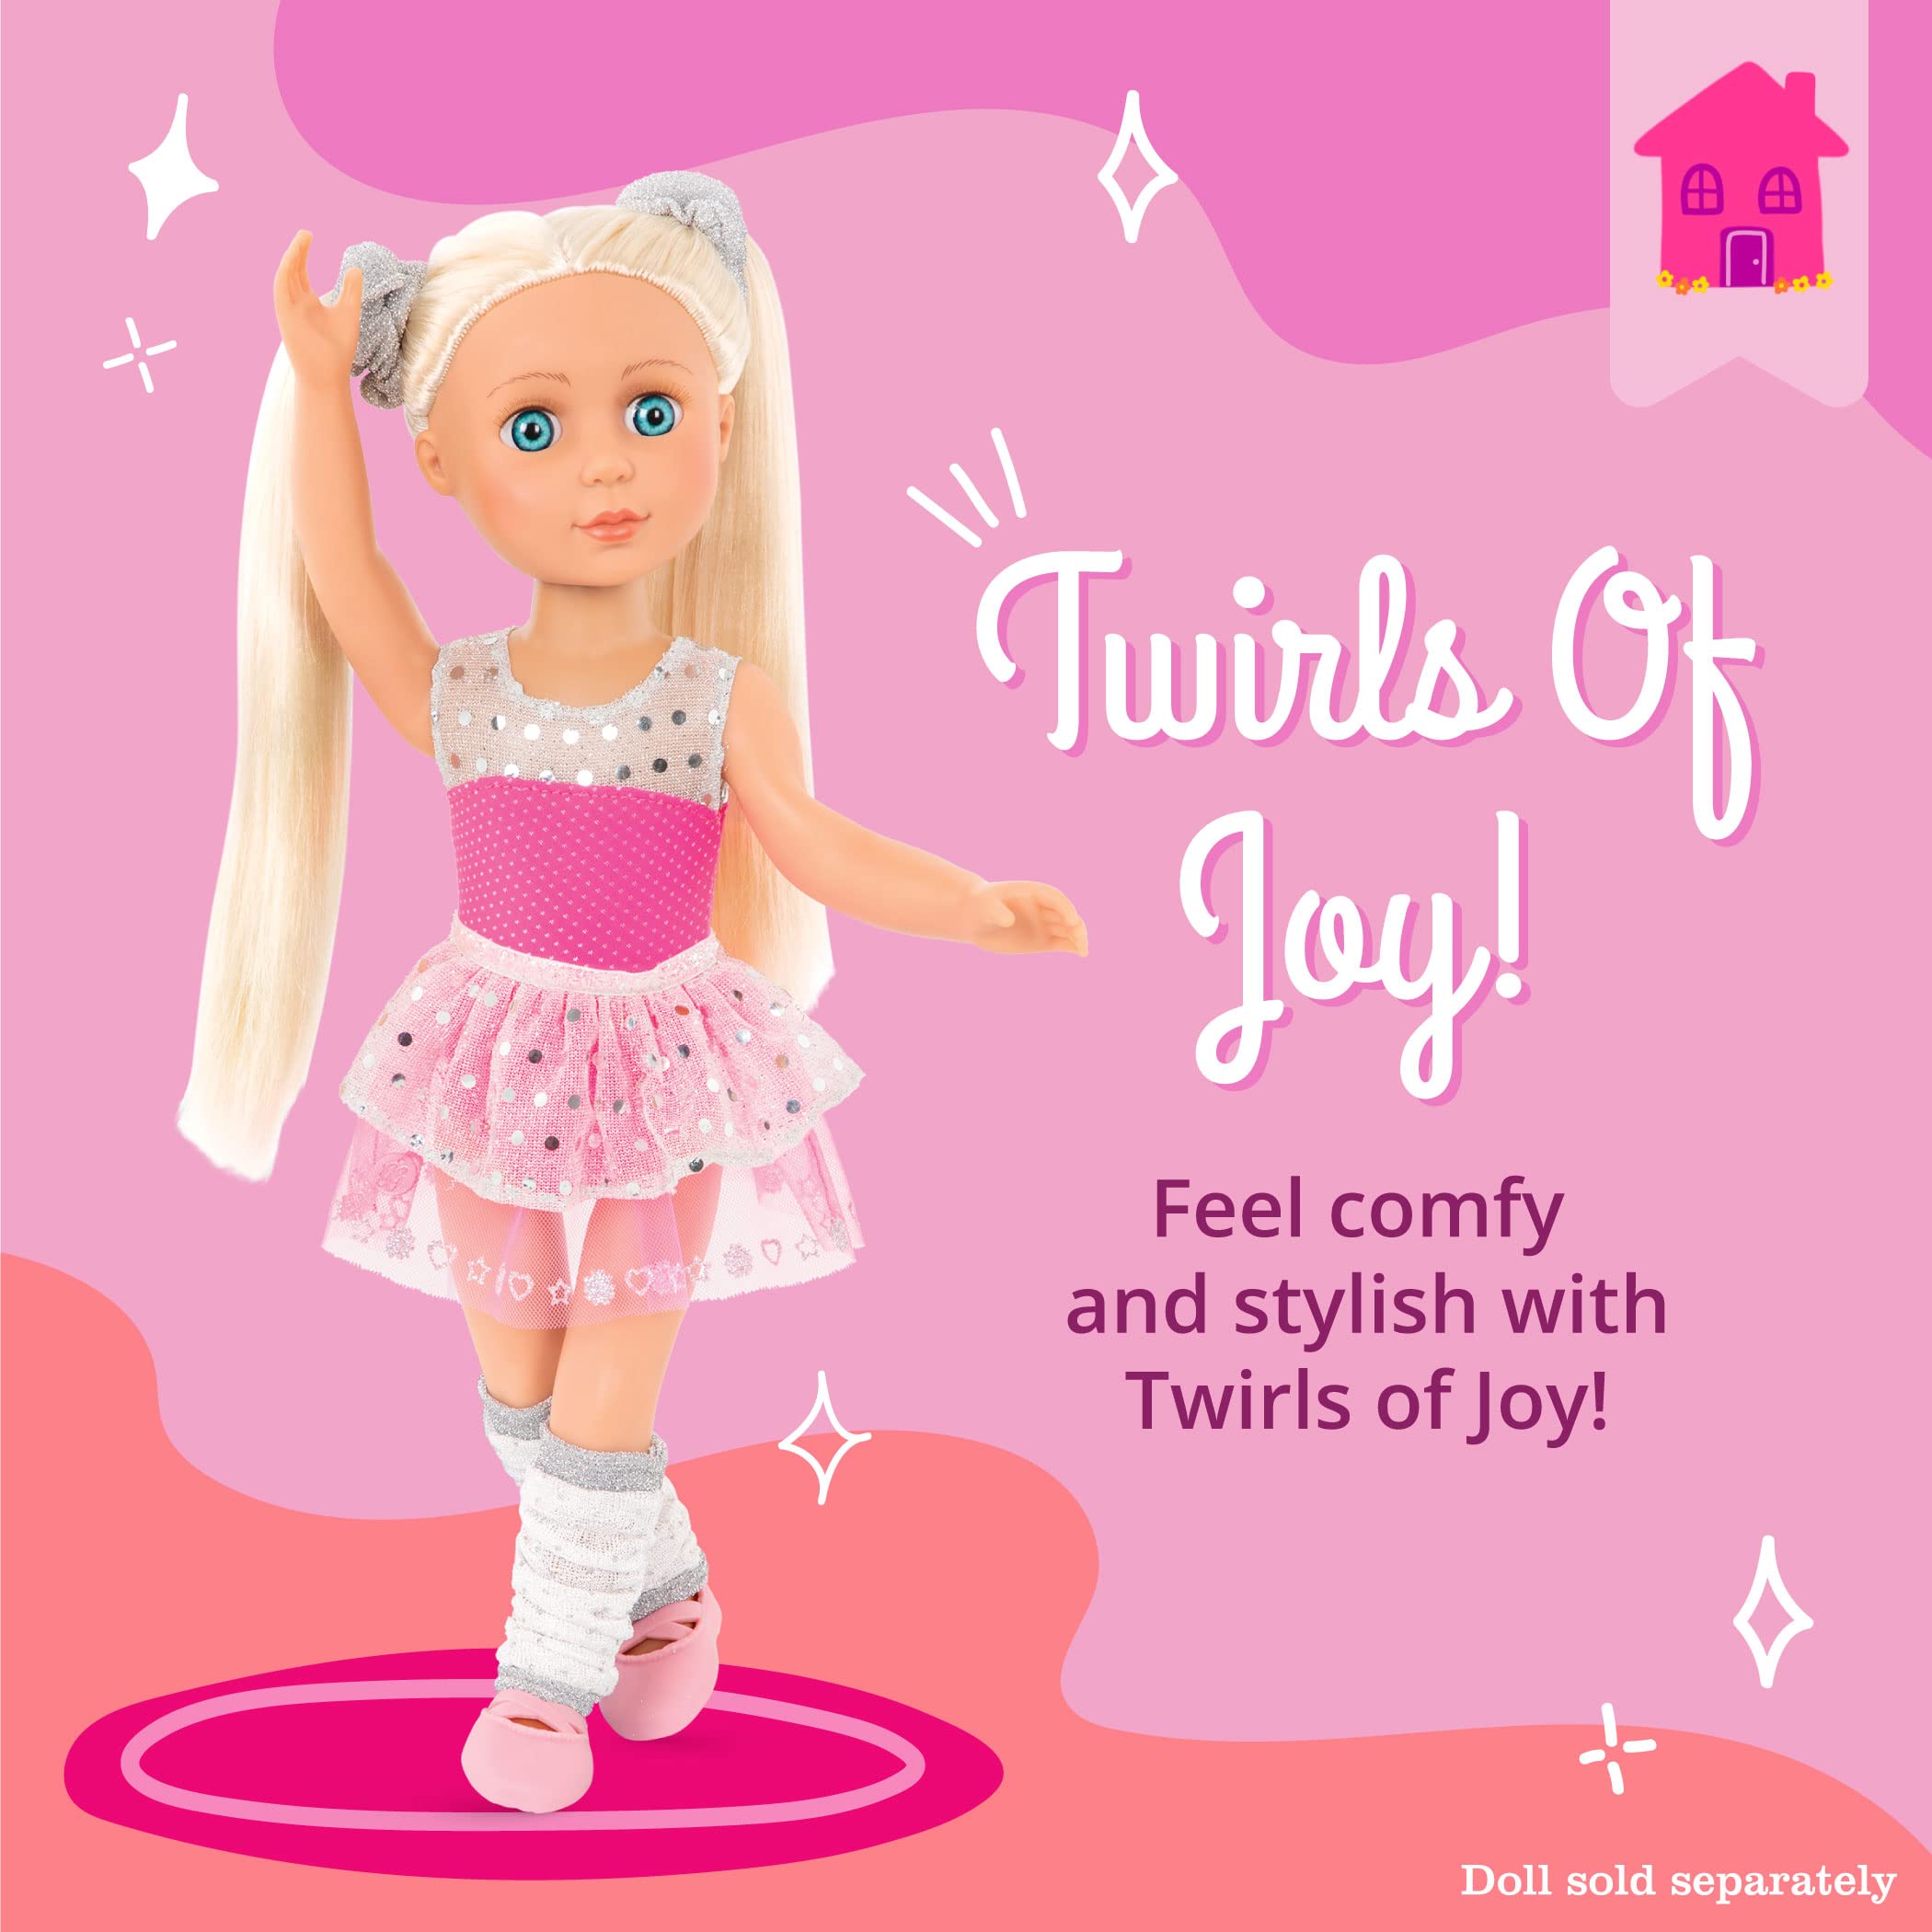 Glitter Girls – Twirls of Joy Ballerina Outfit Hearts & Stars – Ballet Dress, Hair Elastics, Shoes – 14-inch Doll Clothes & Accessories for Kids Ages 3 & Up – Children’s Toys